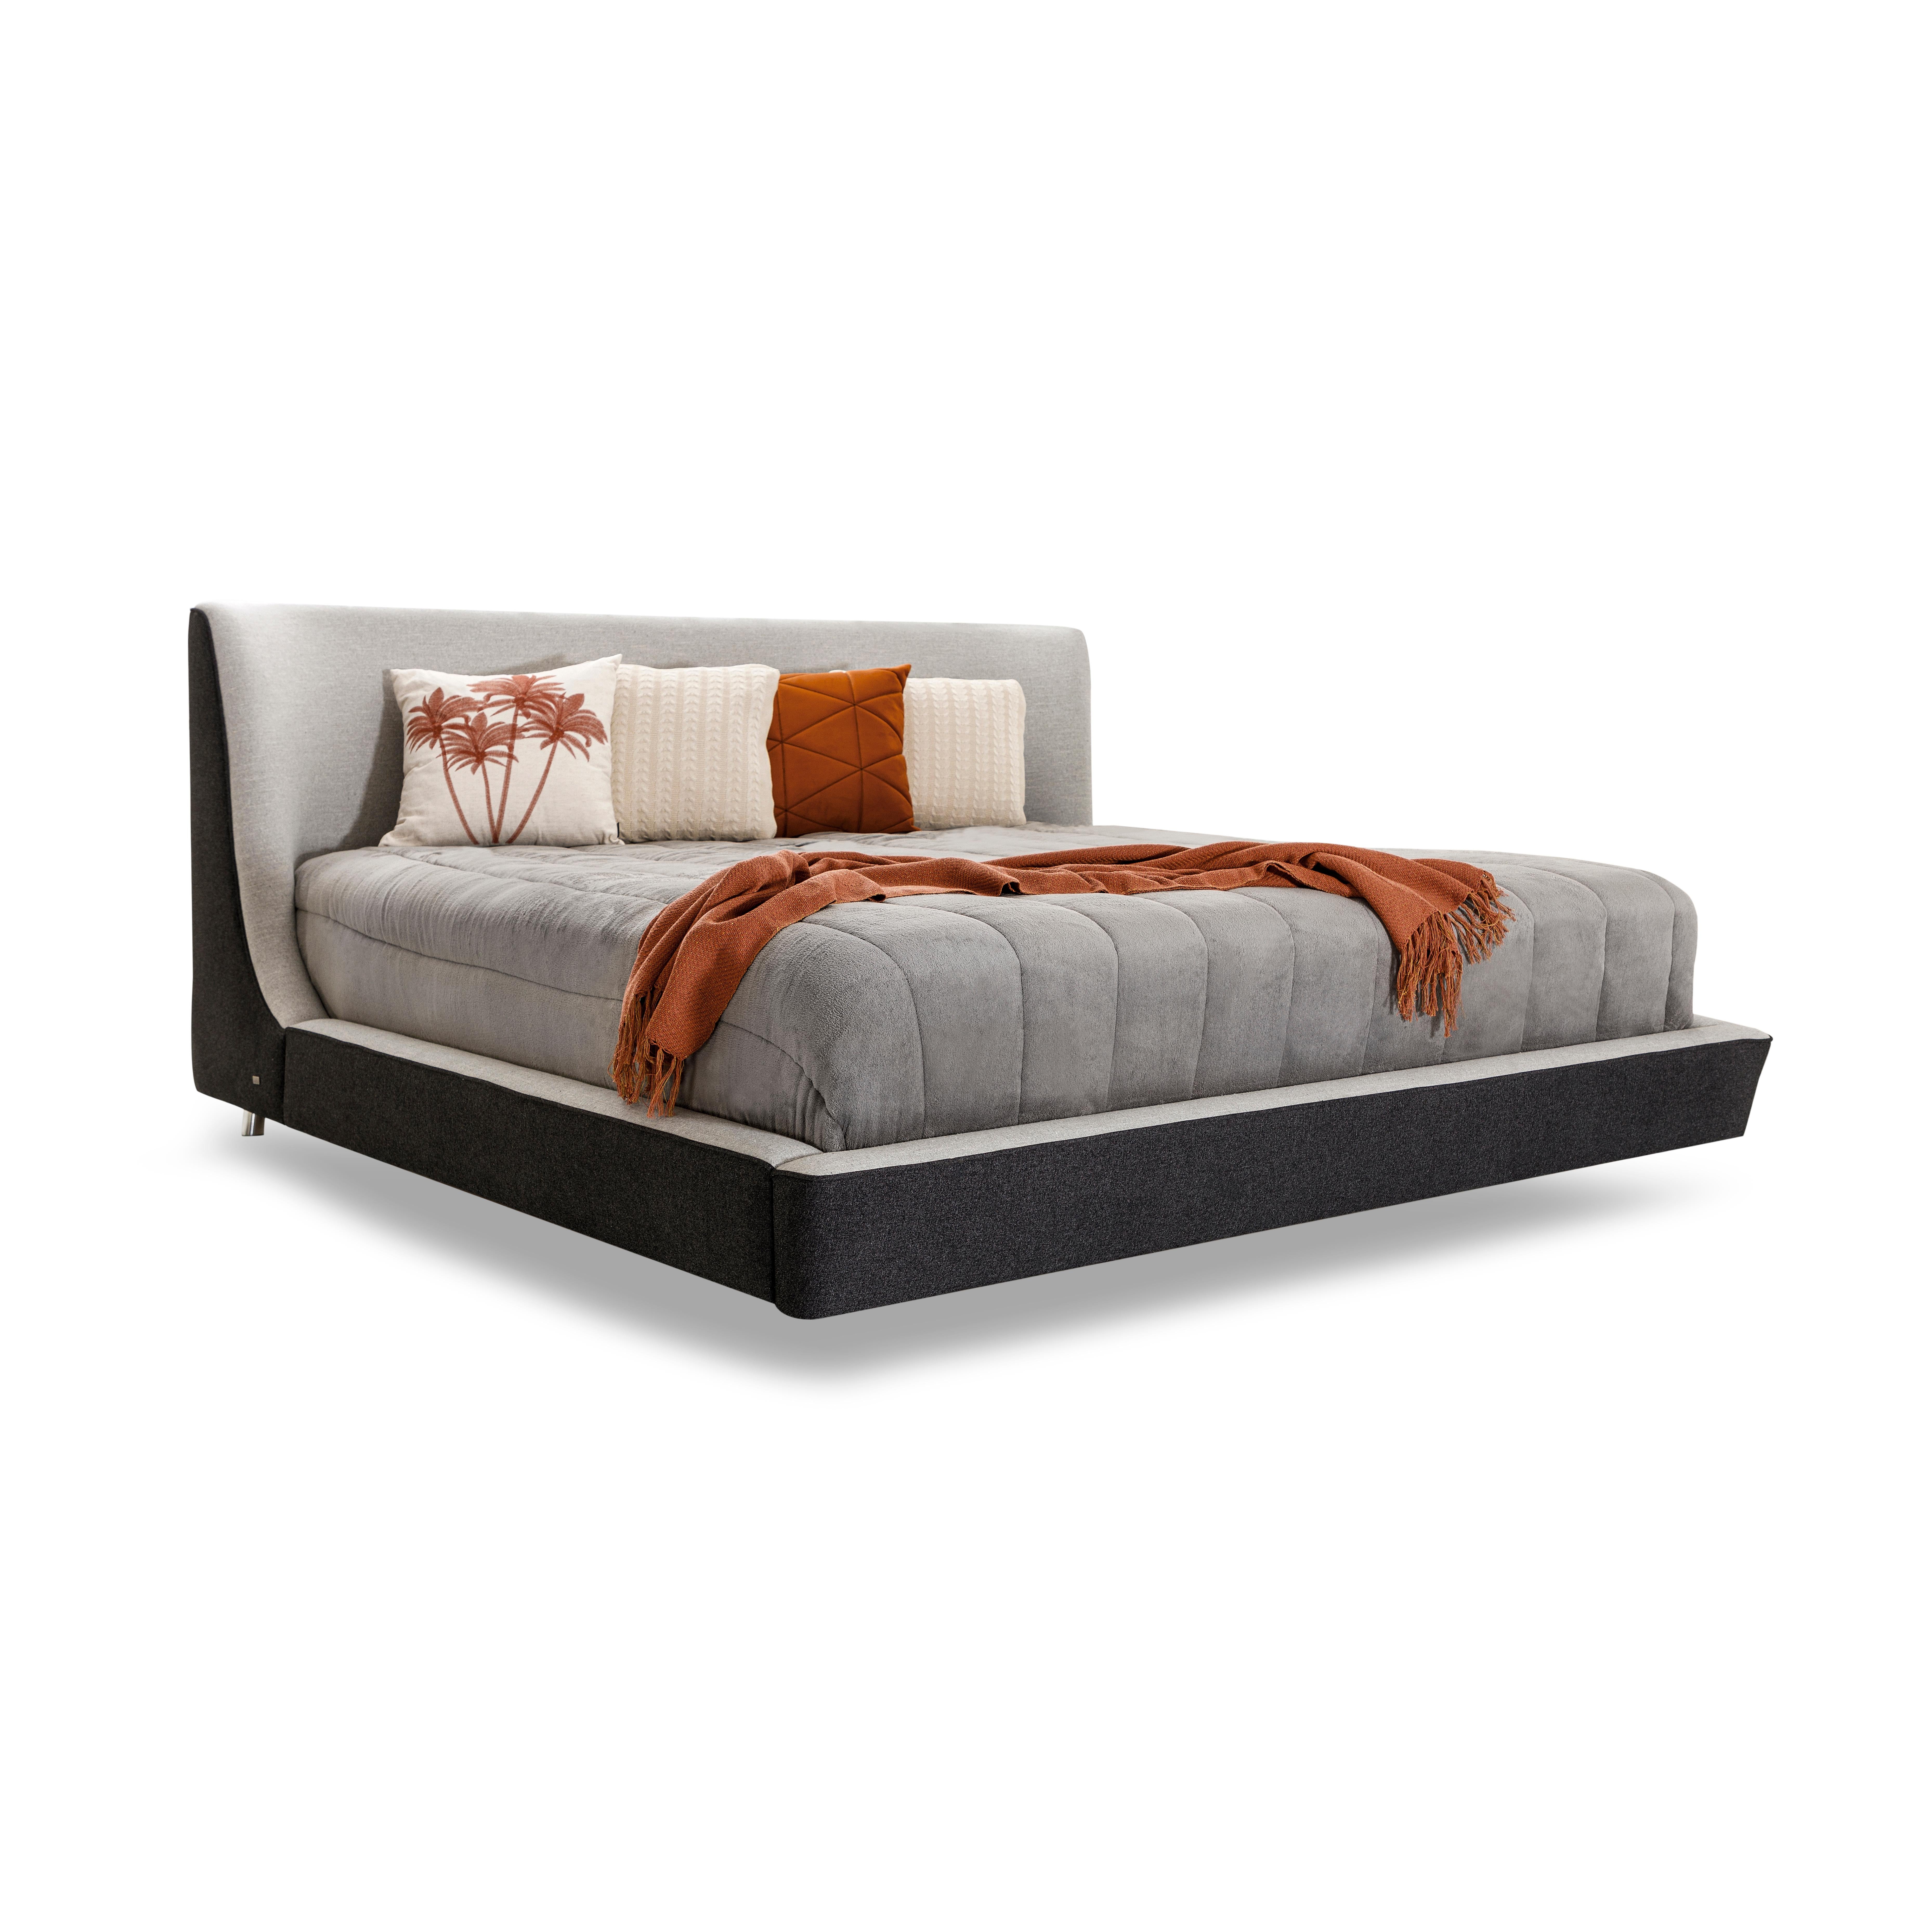 Musa King Bed in a Black and Oatmeal Fabric Combination For Sale 1